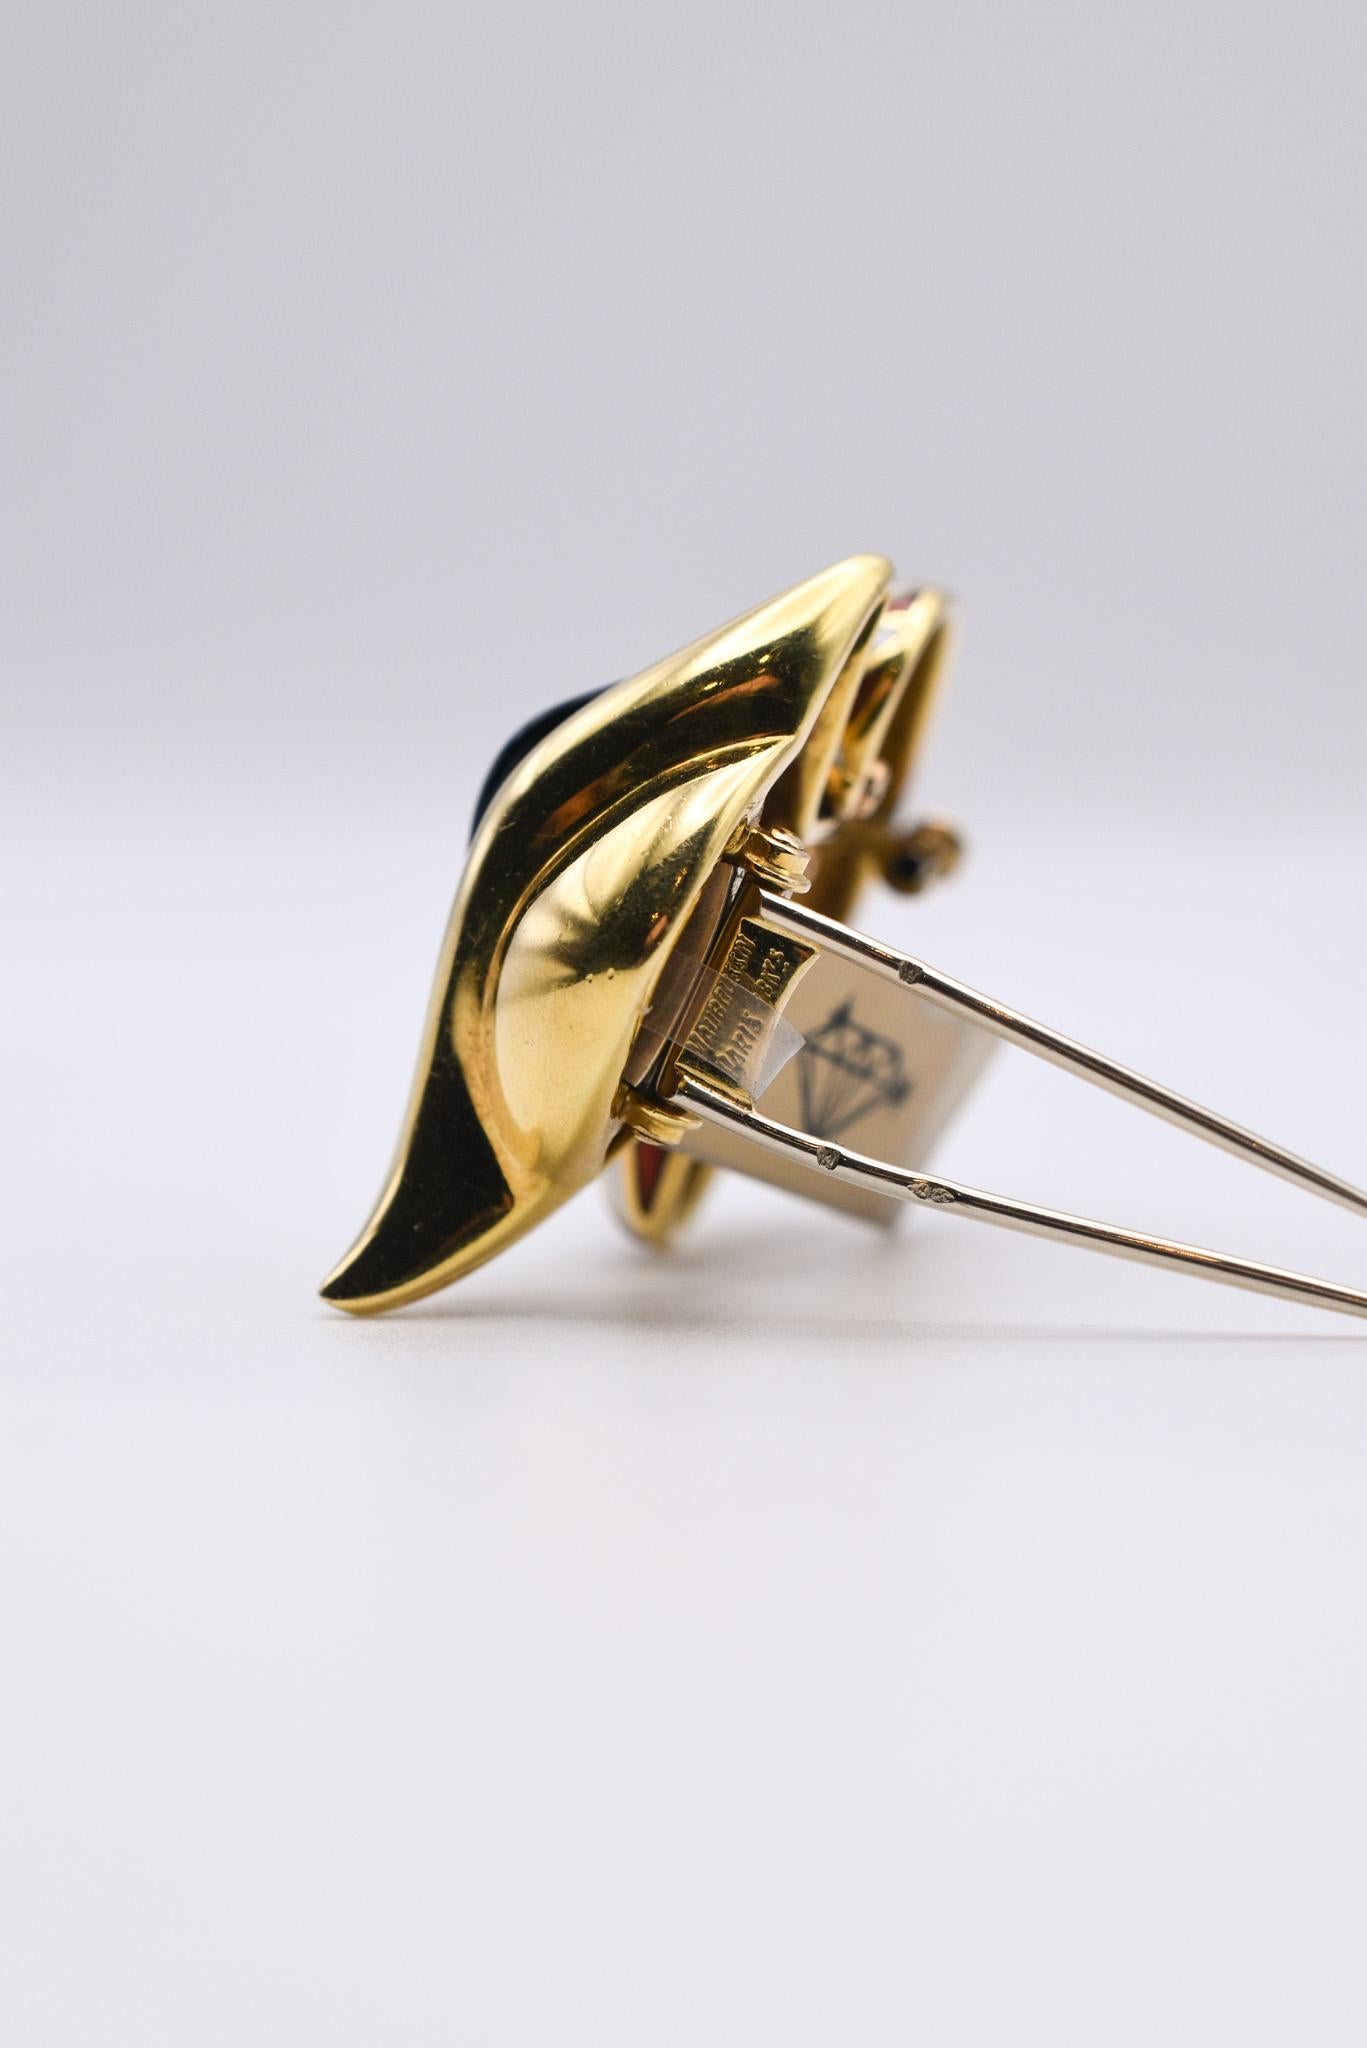 Mauboussin Arlequin Enamel and Gold Brooch In Excellent Condition For Sale In New York, NY